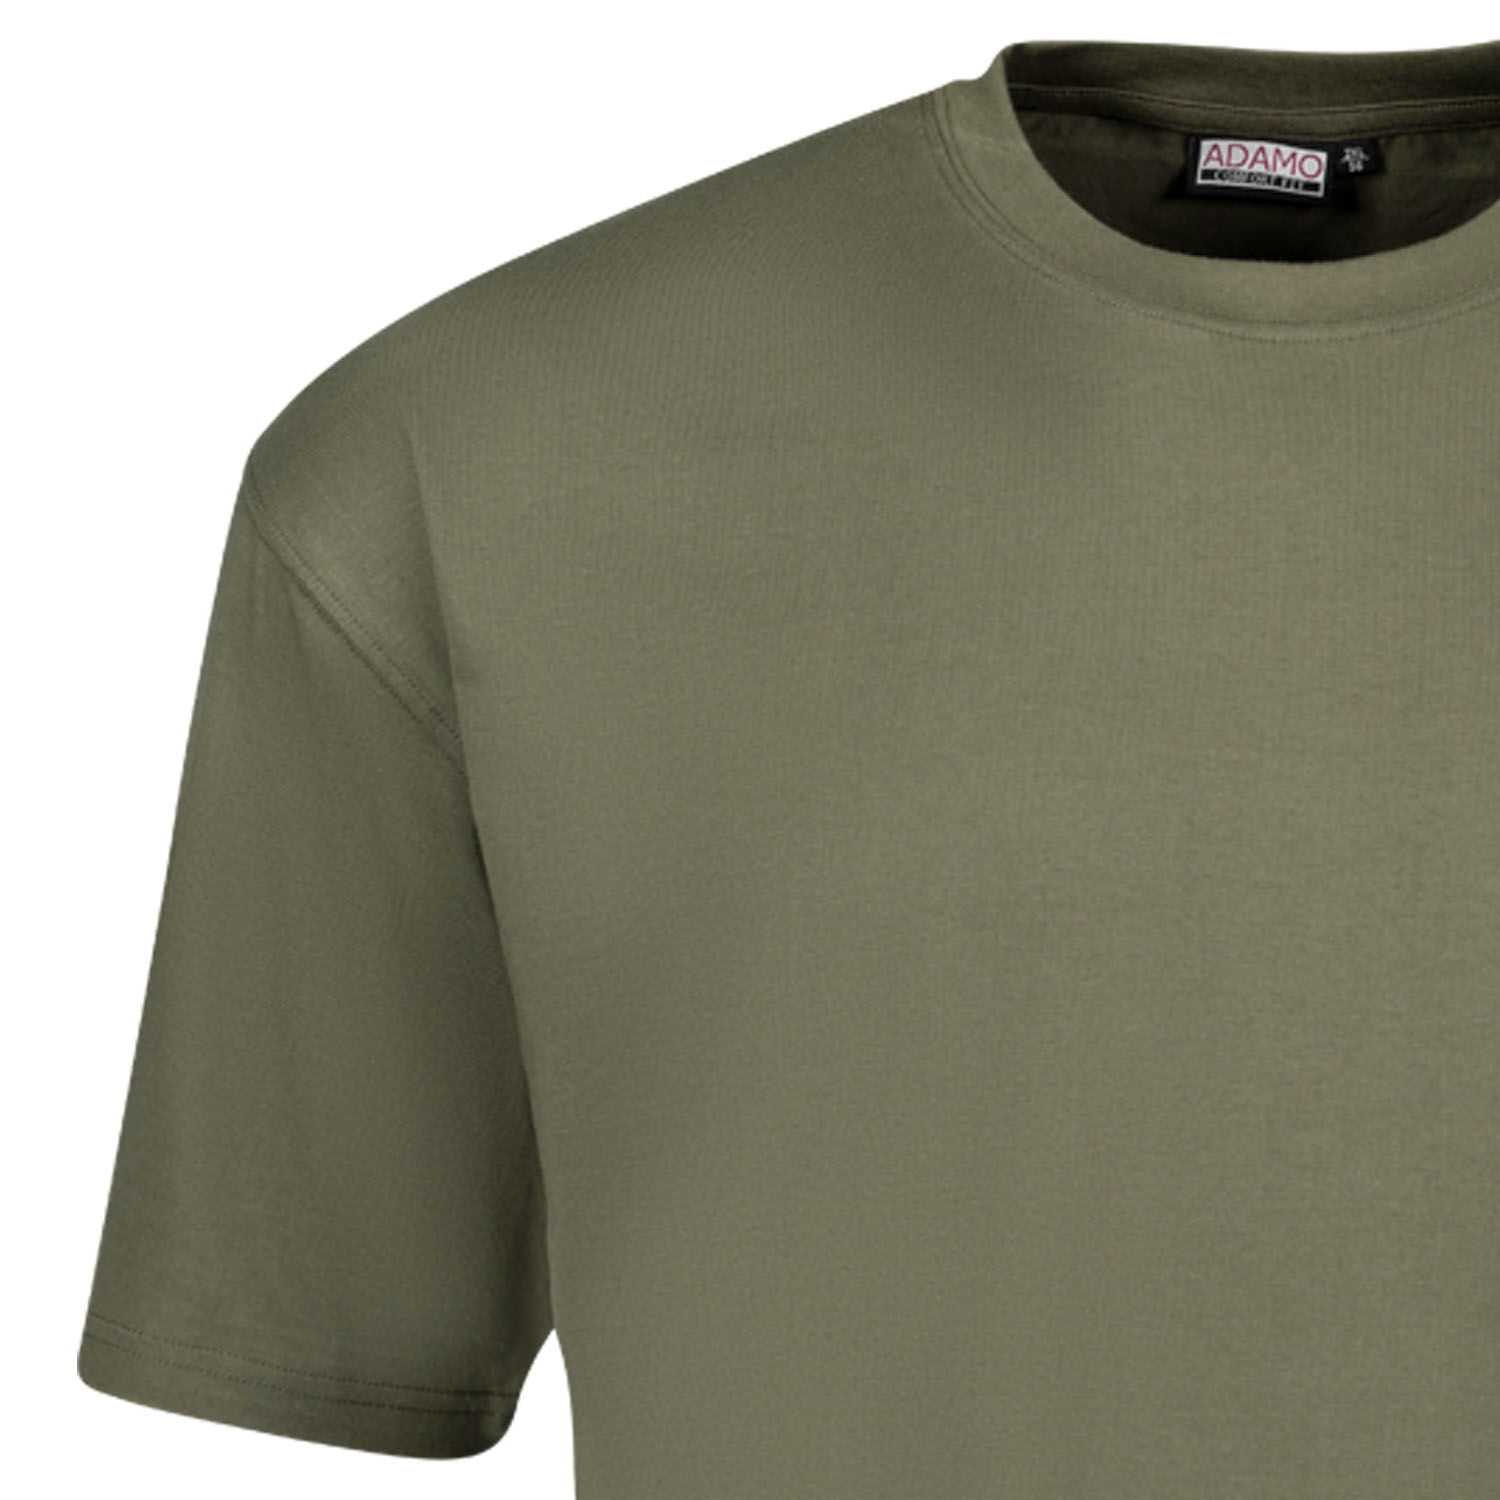 T-shirts in olive COMFORT FIT series Marlon by Adamo for men up to oversize 12XL - double pack